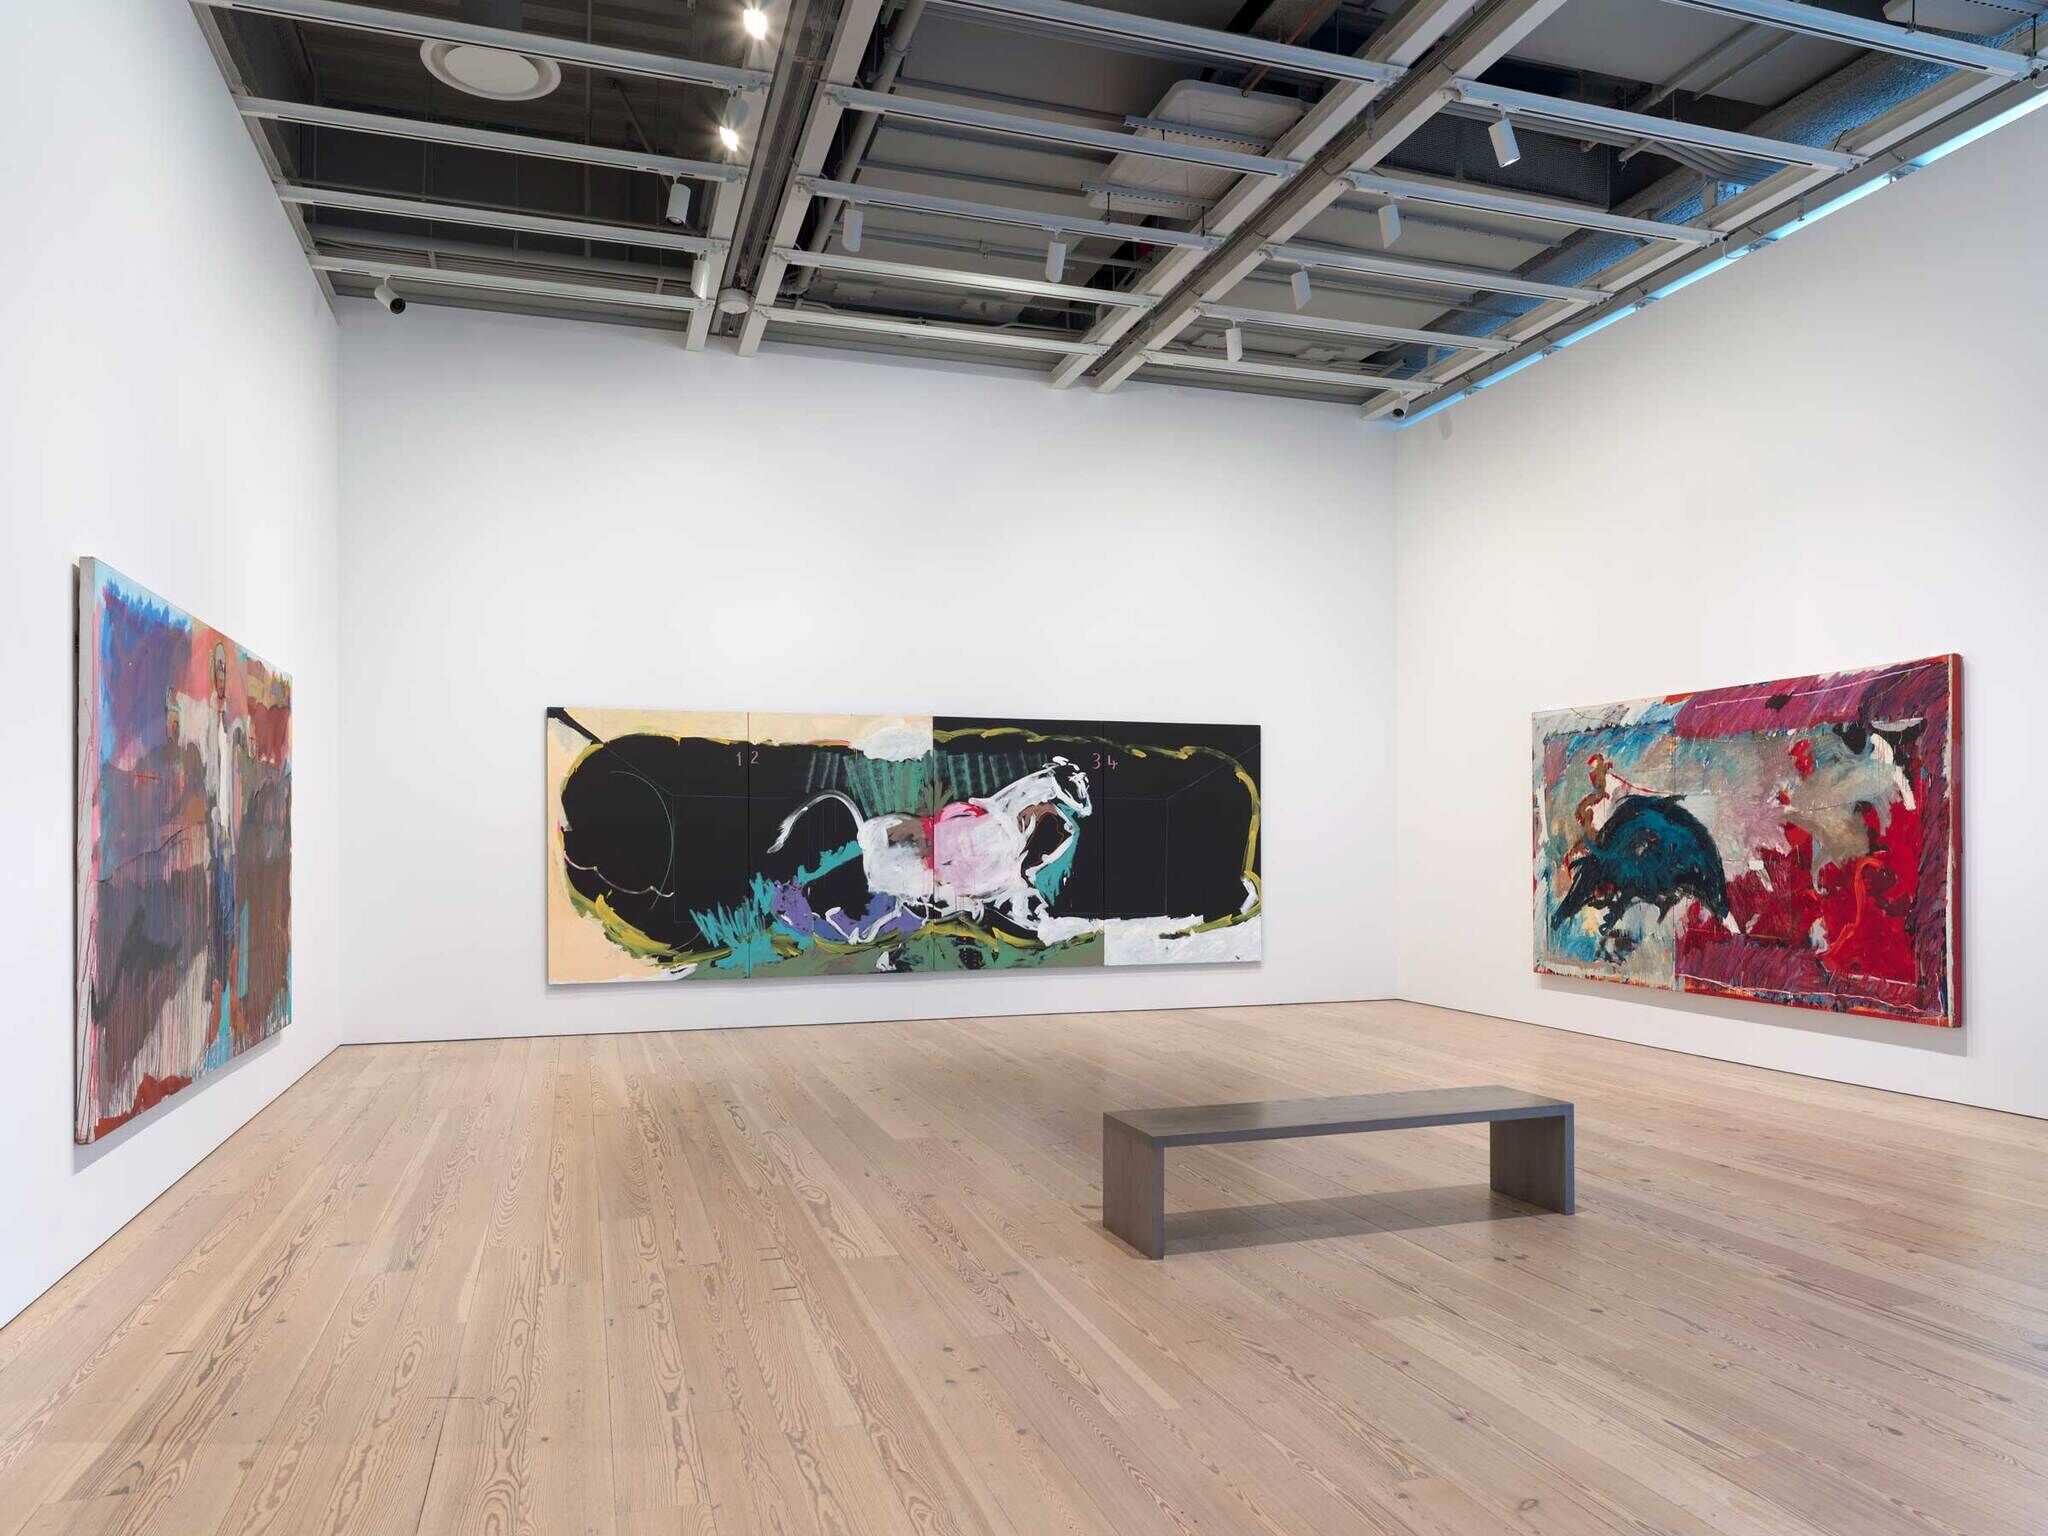 Modern art gallery interior with three large abstract paintings on white walls and a wooden floor, with a bench in the center.